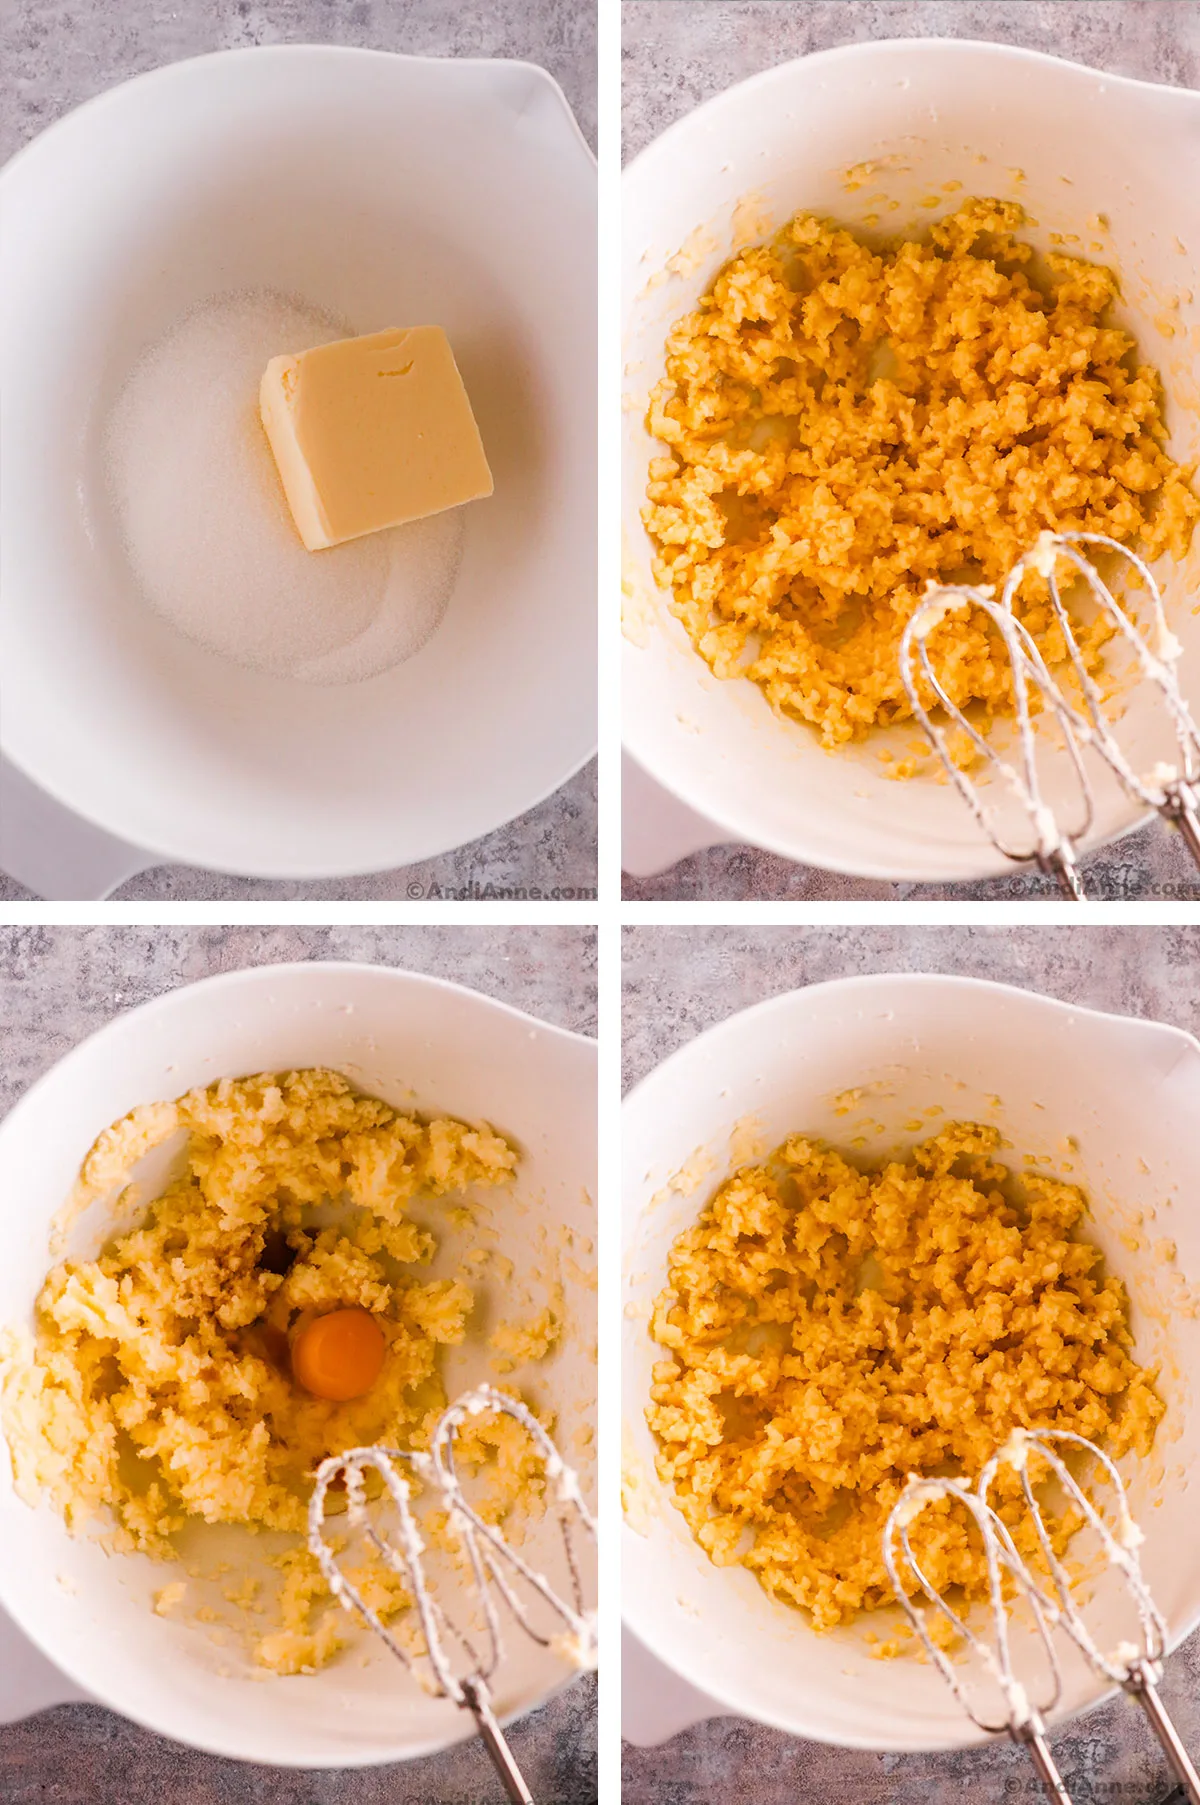 Four images, first is butter and granulated sugar unmixed, second is mixed together. Third image has egg dumped in, fourth has egg mixed in.